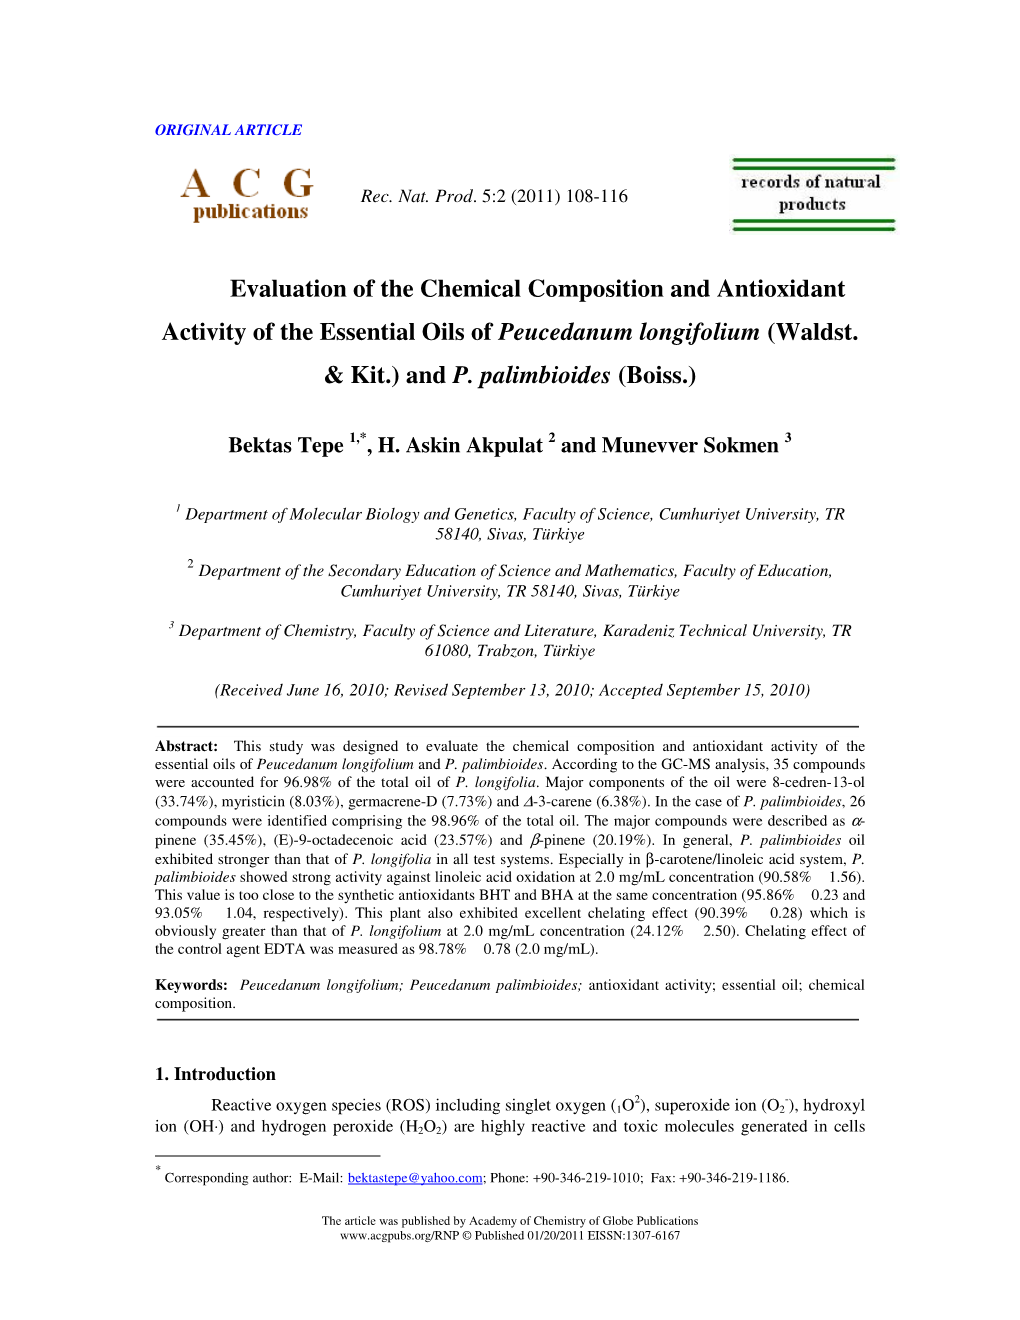 Evaluation of the Chemical Composition and Antioxidant Activity of the Essential Oils of Peucedanum Longifolium (Waldst